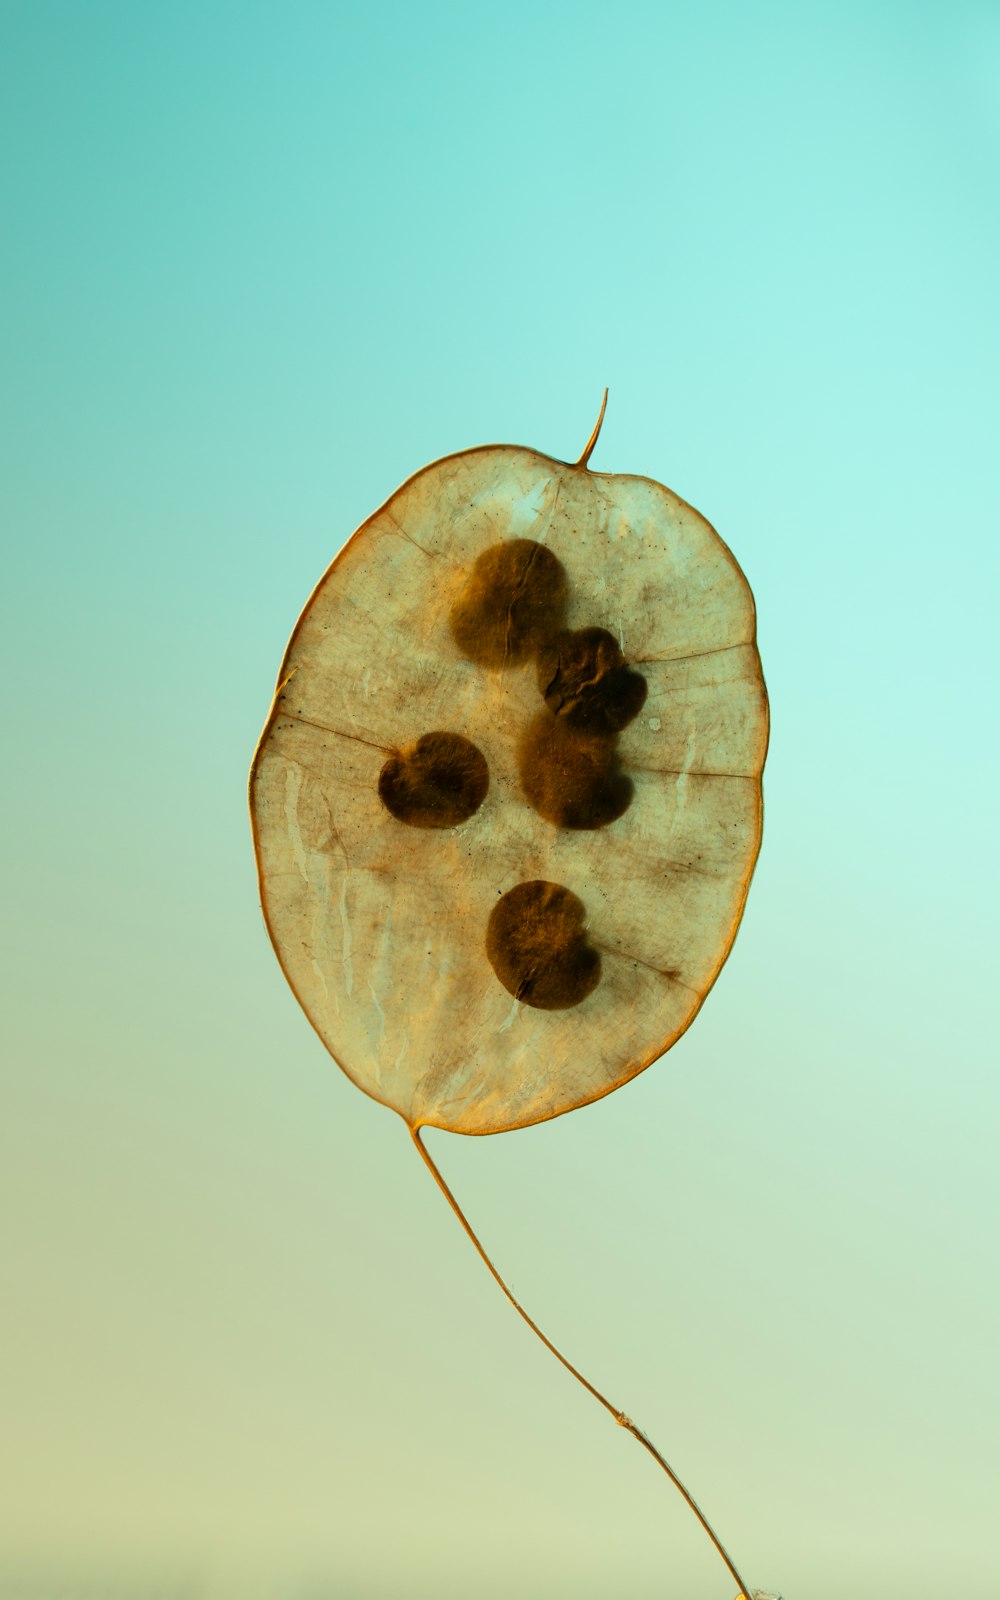 a leaf with a few seeds attached to it